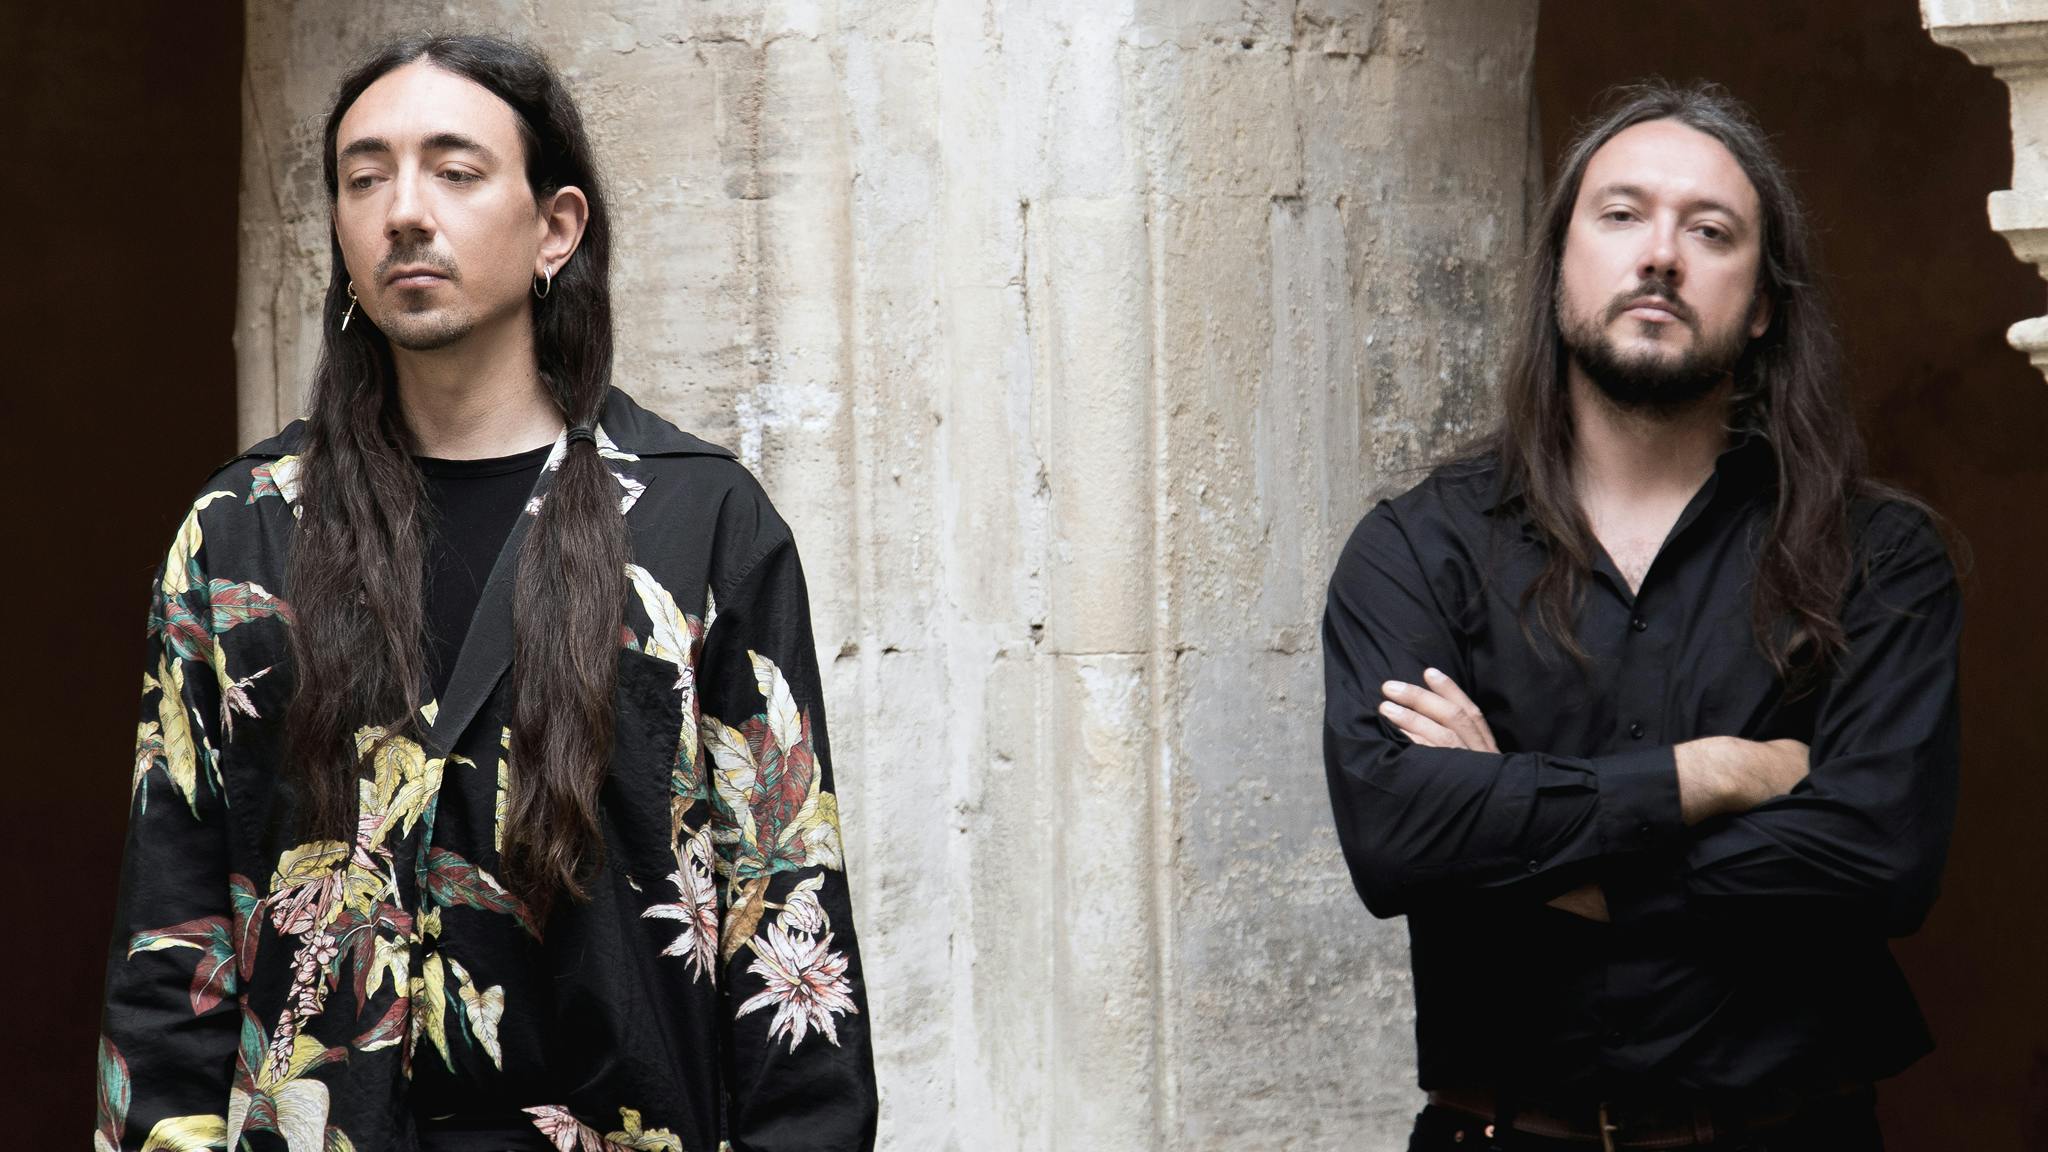 Alcest: “In dark times, to make an album of beauty and positivity could really stick out”